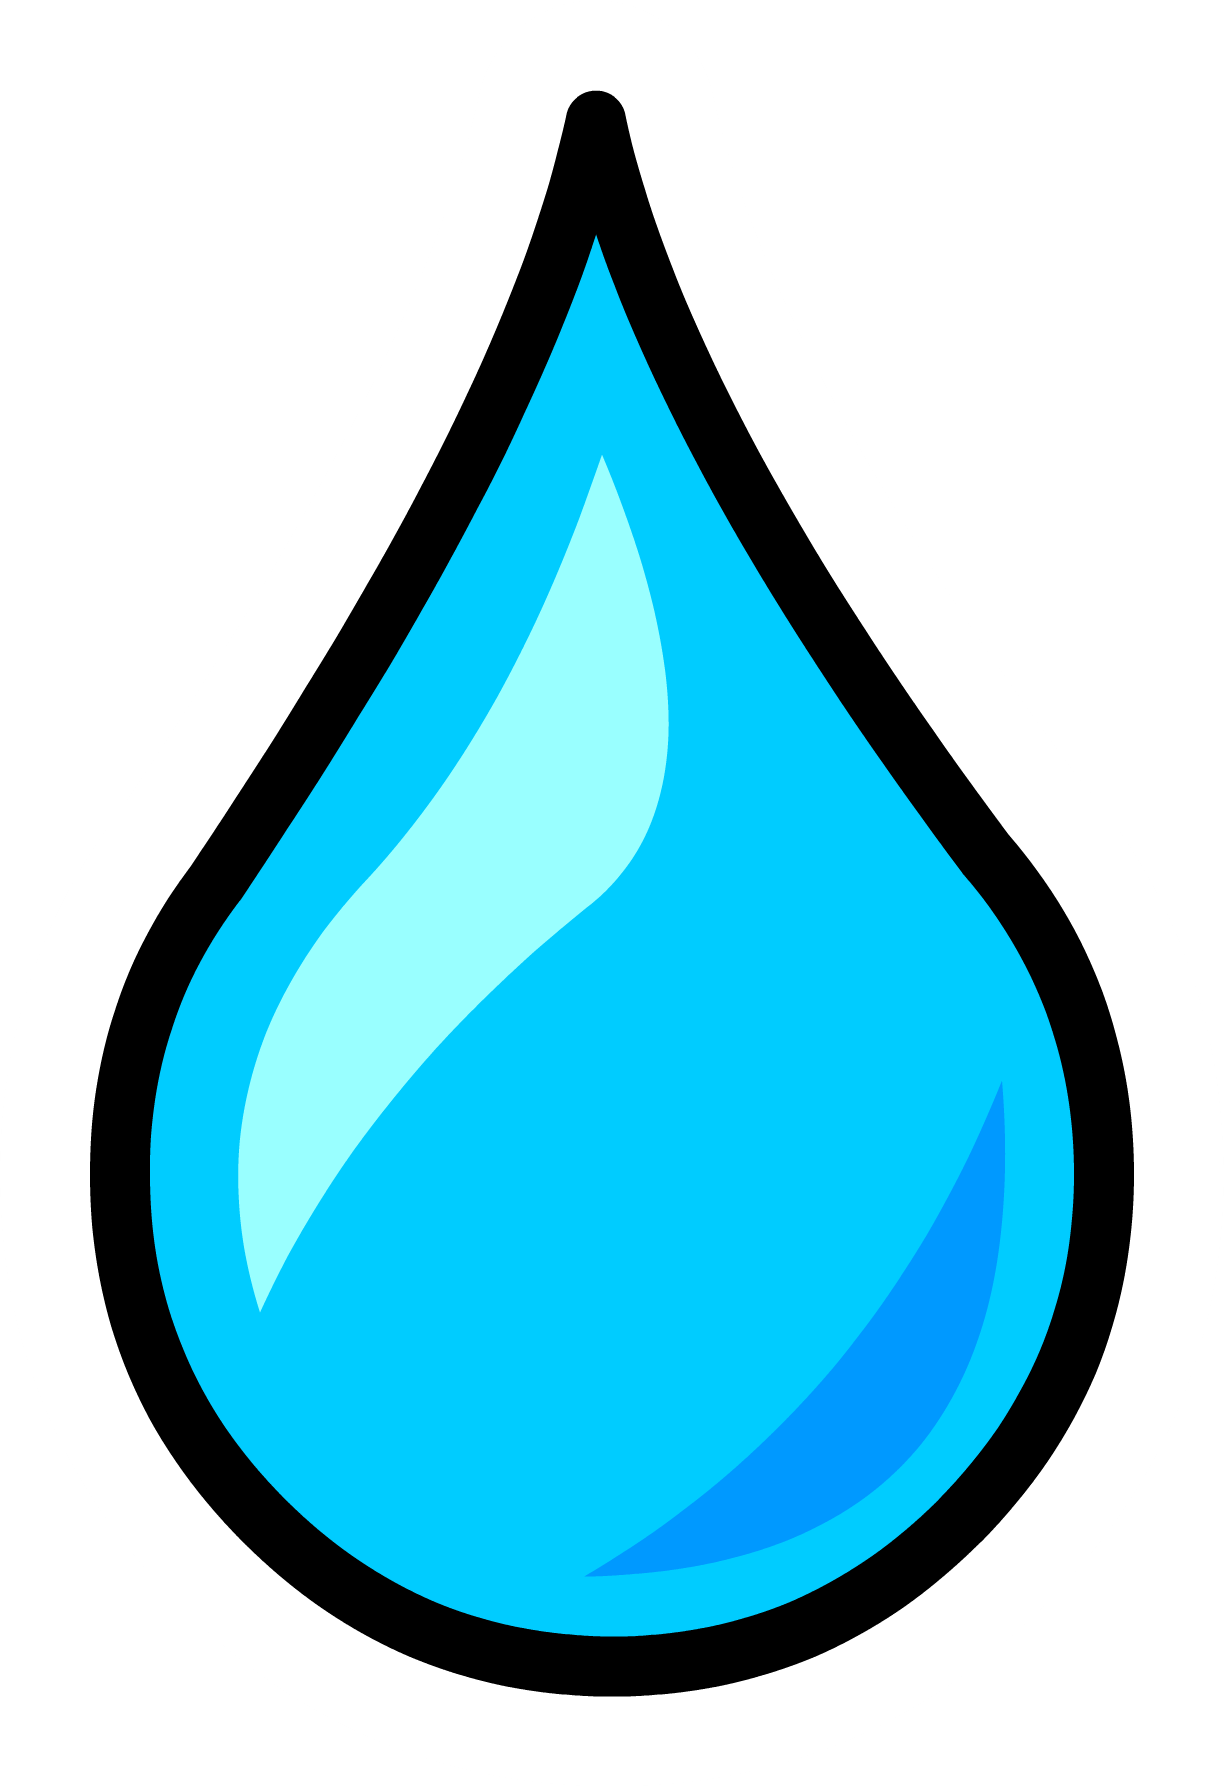 Image - Water Droplet Pin.PNG | Club Penguin Wiki | FANDOM powered by Wikia